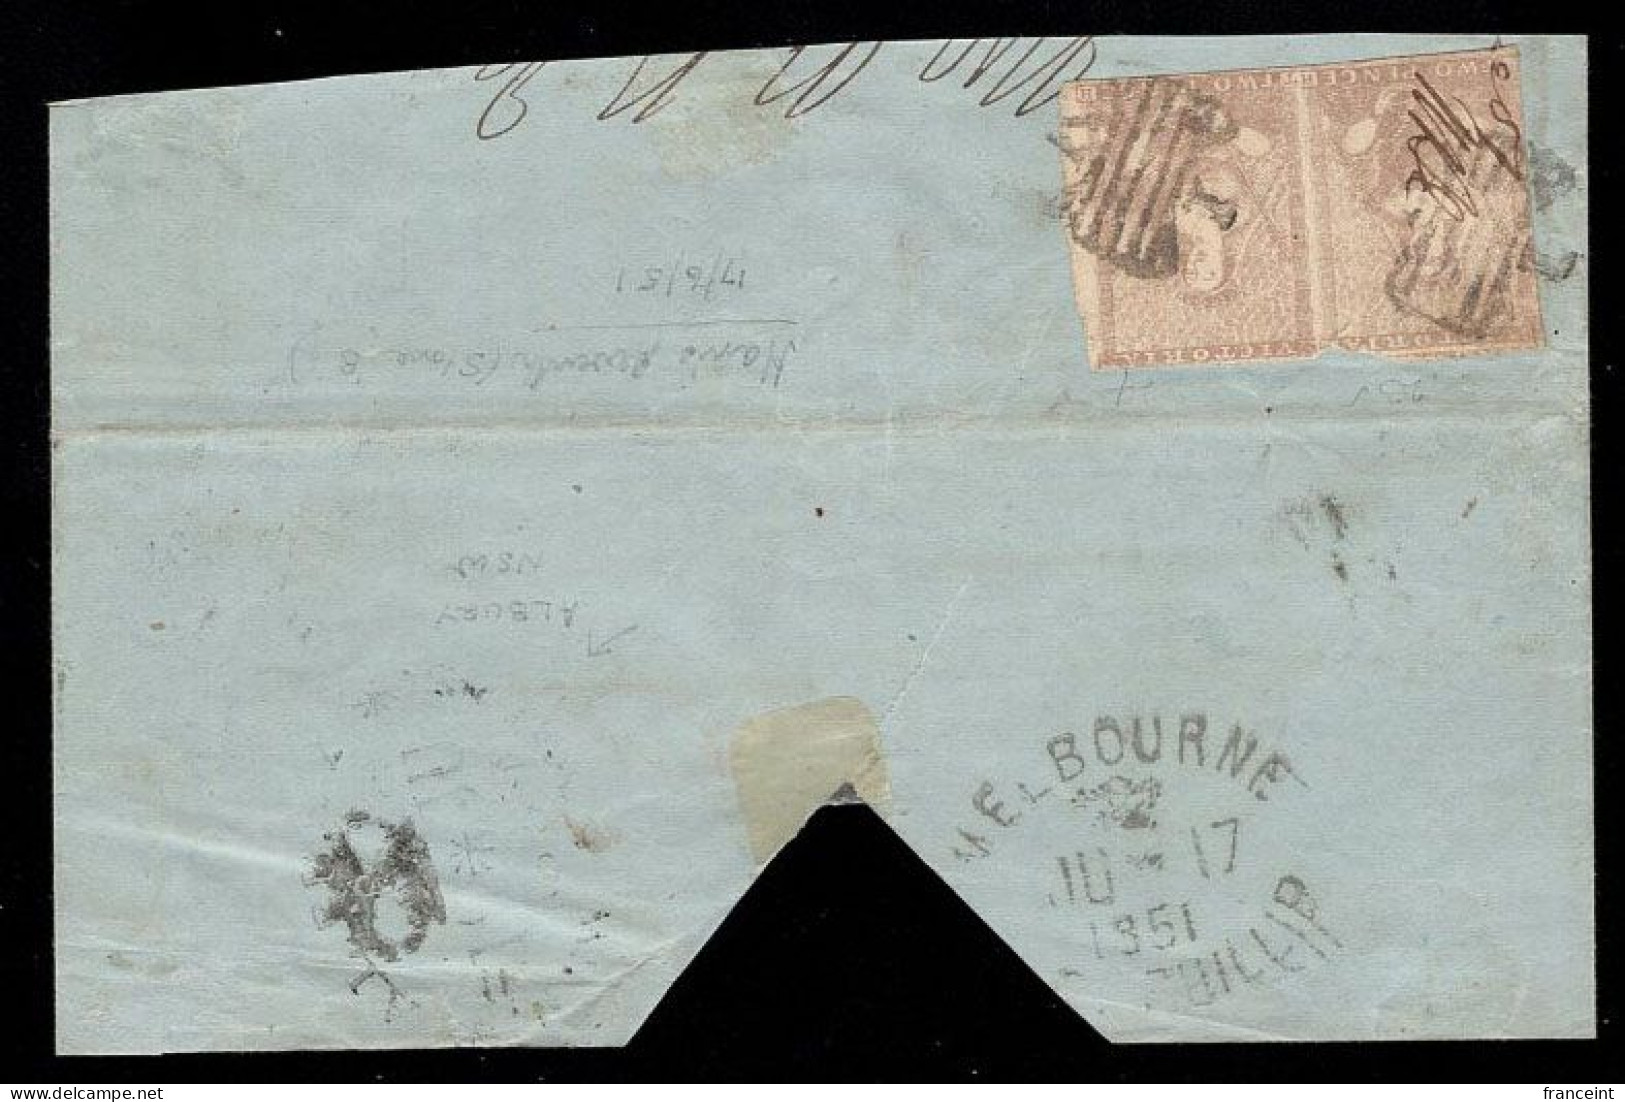 VICTORIA(1851) Butterfly Fancy Cancel In Black On Pair Of Scott No 7A On Envelope Front. Rare Exhibit Item! - Storia Postale